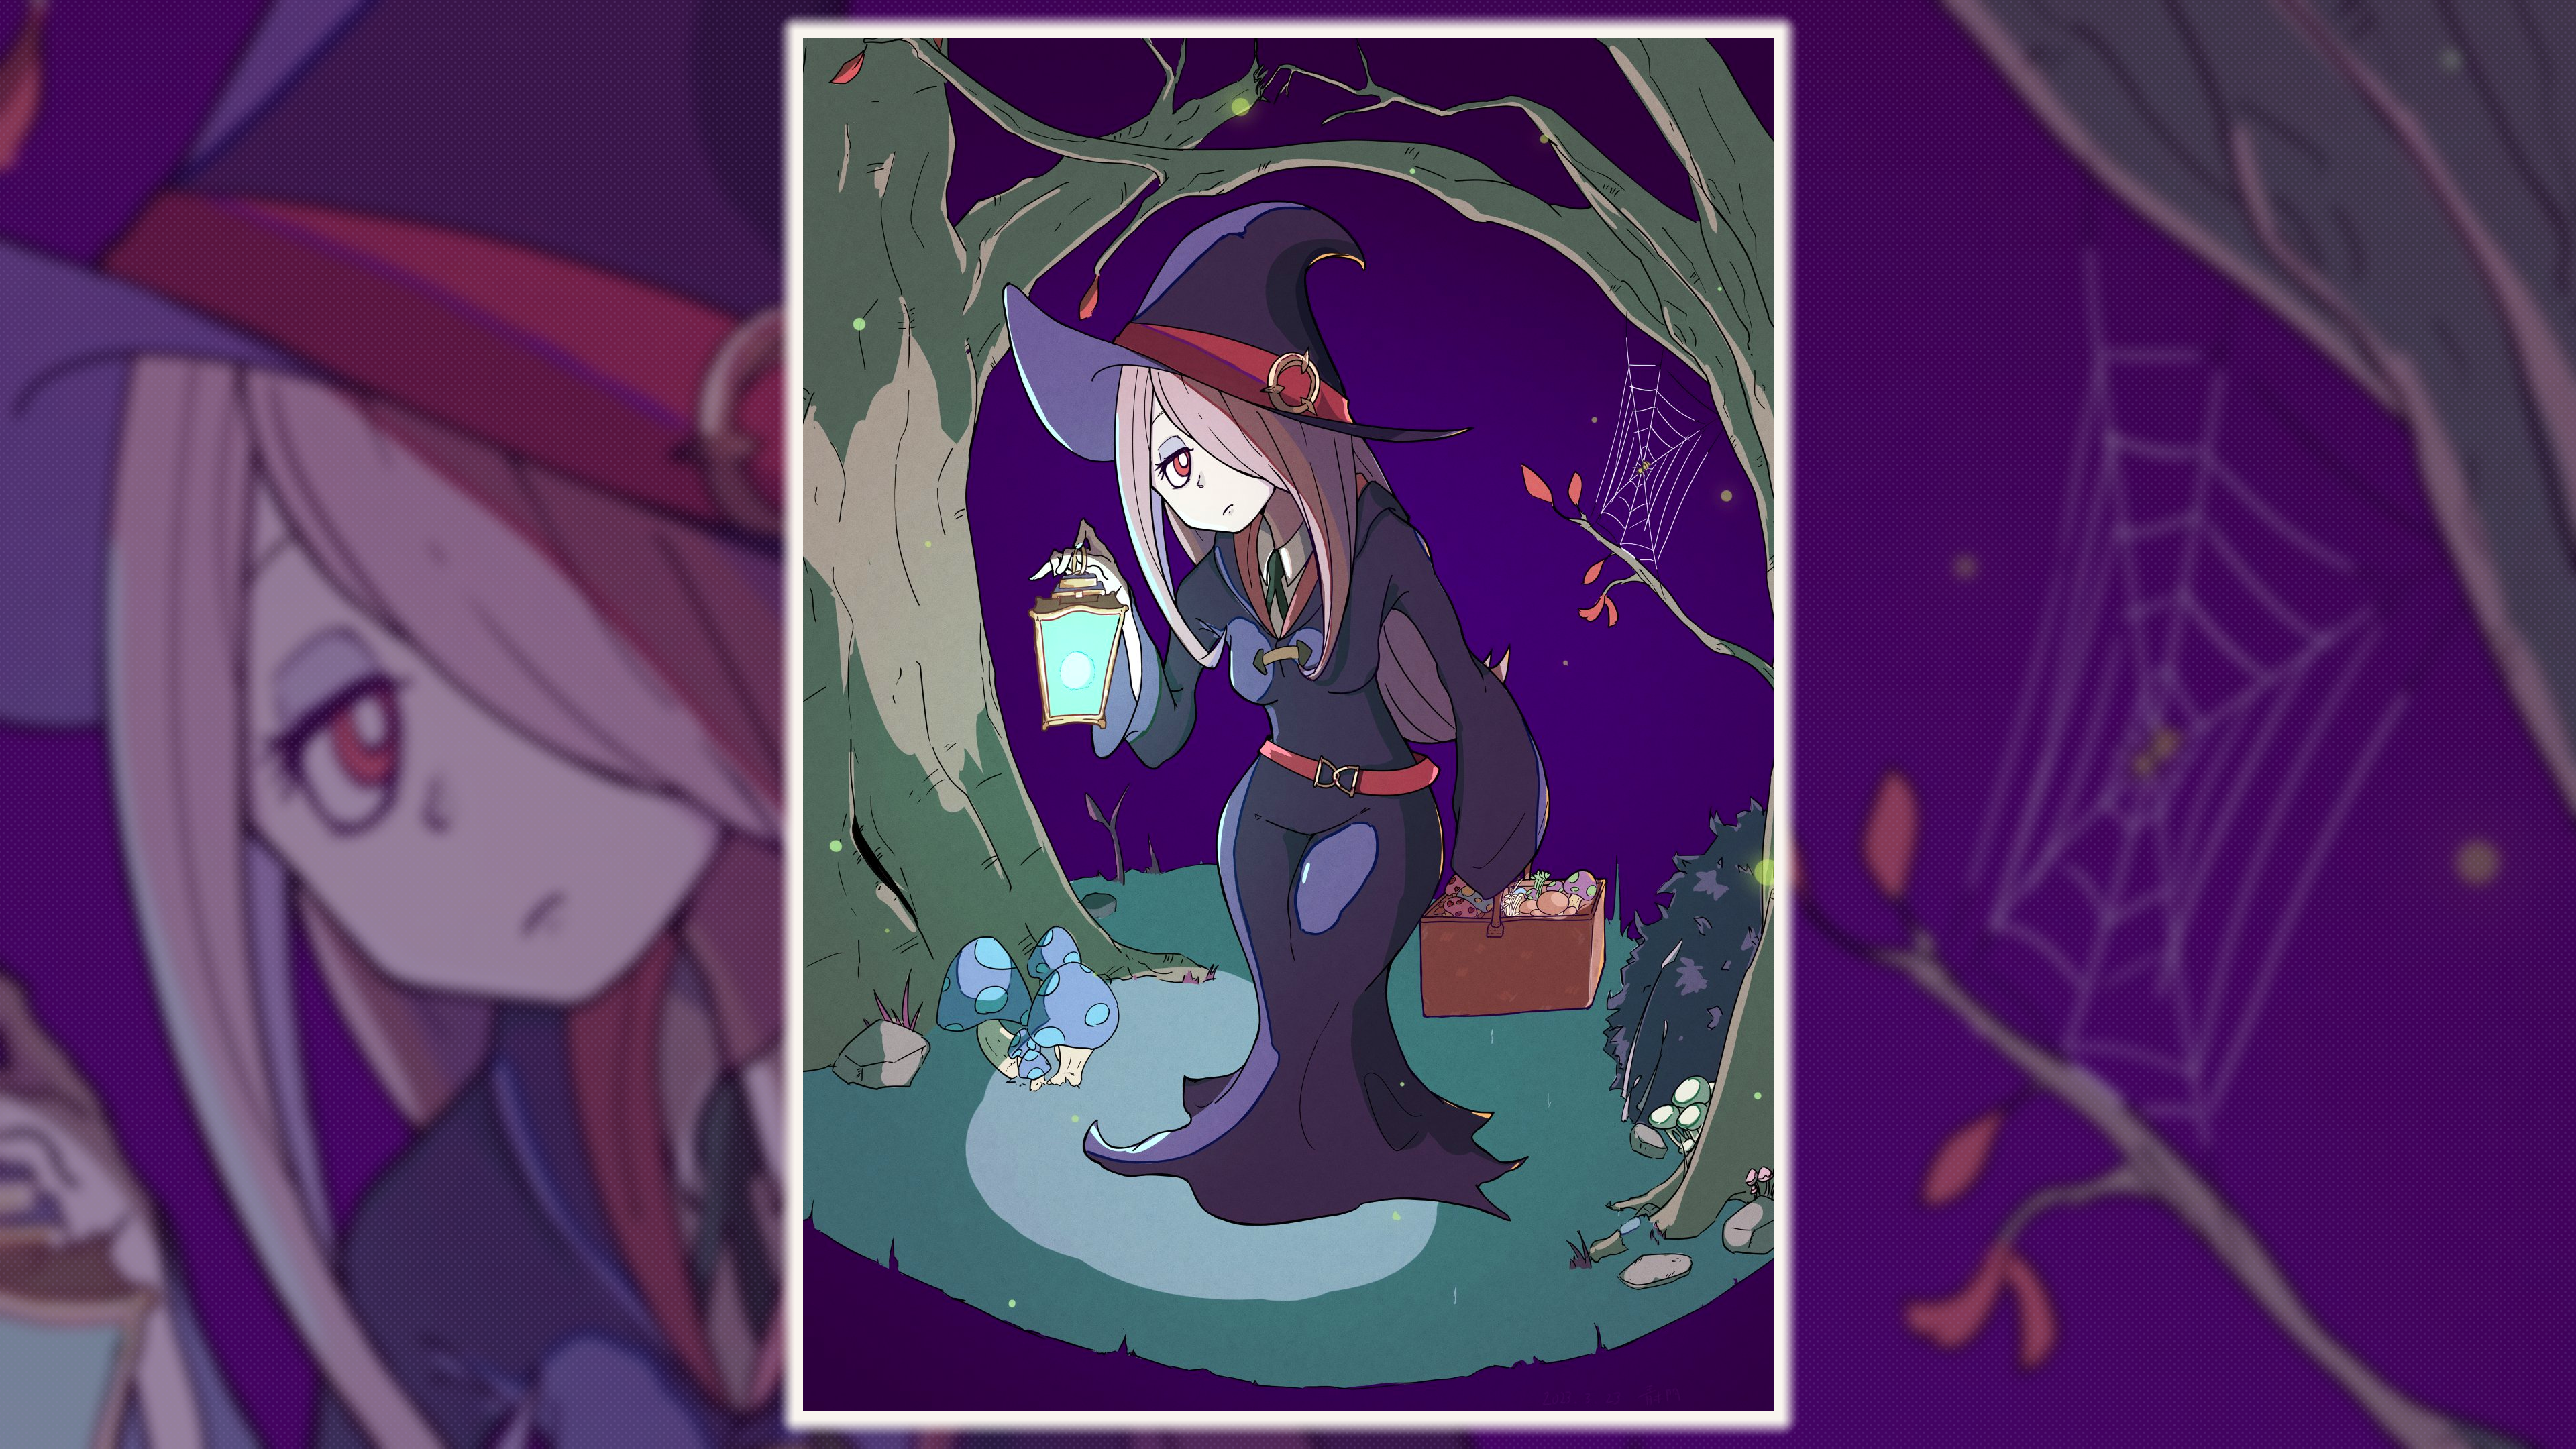 Little Witch Academia Sucy Manbavaran Pink Hair Purple Hair Witch Hat Witch Lantern Lamp Trees Leave 3840x2160